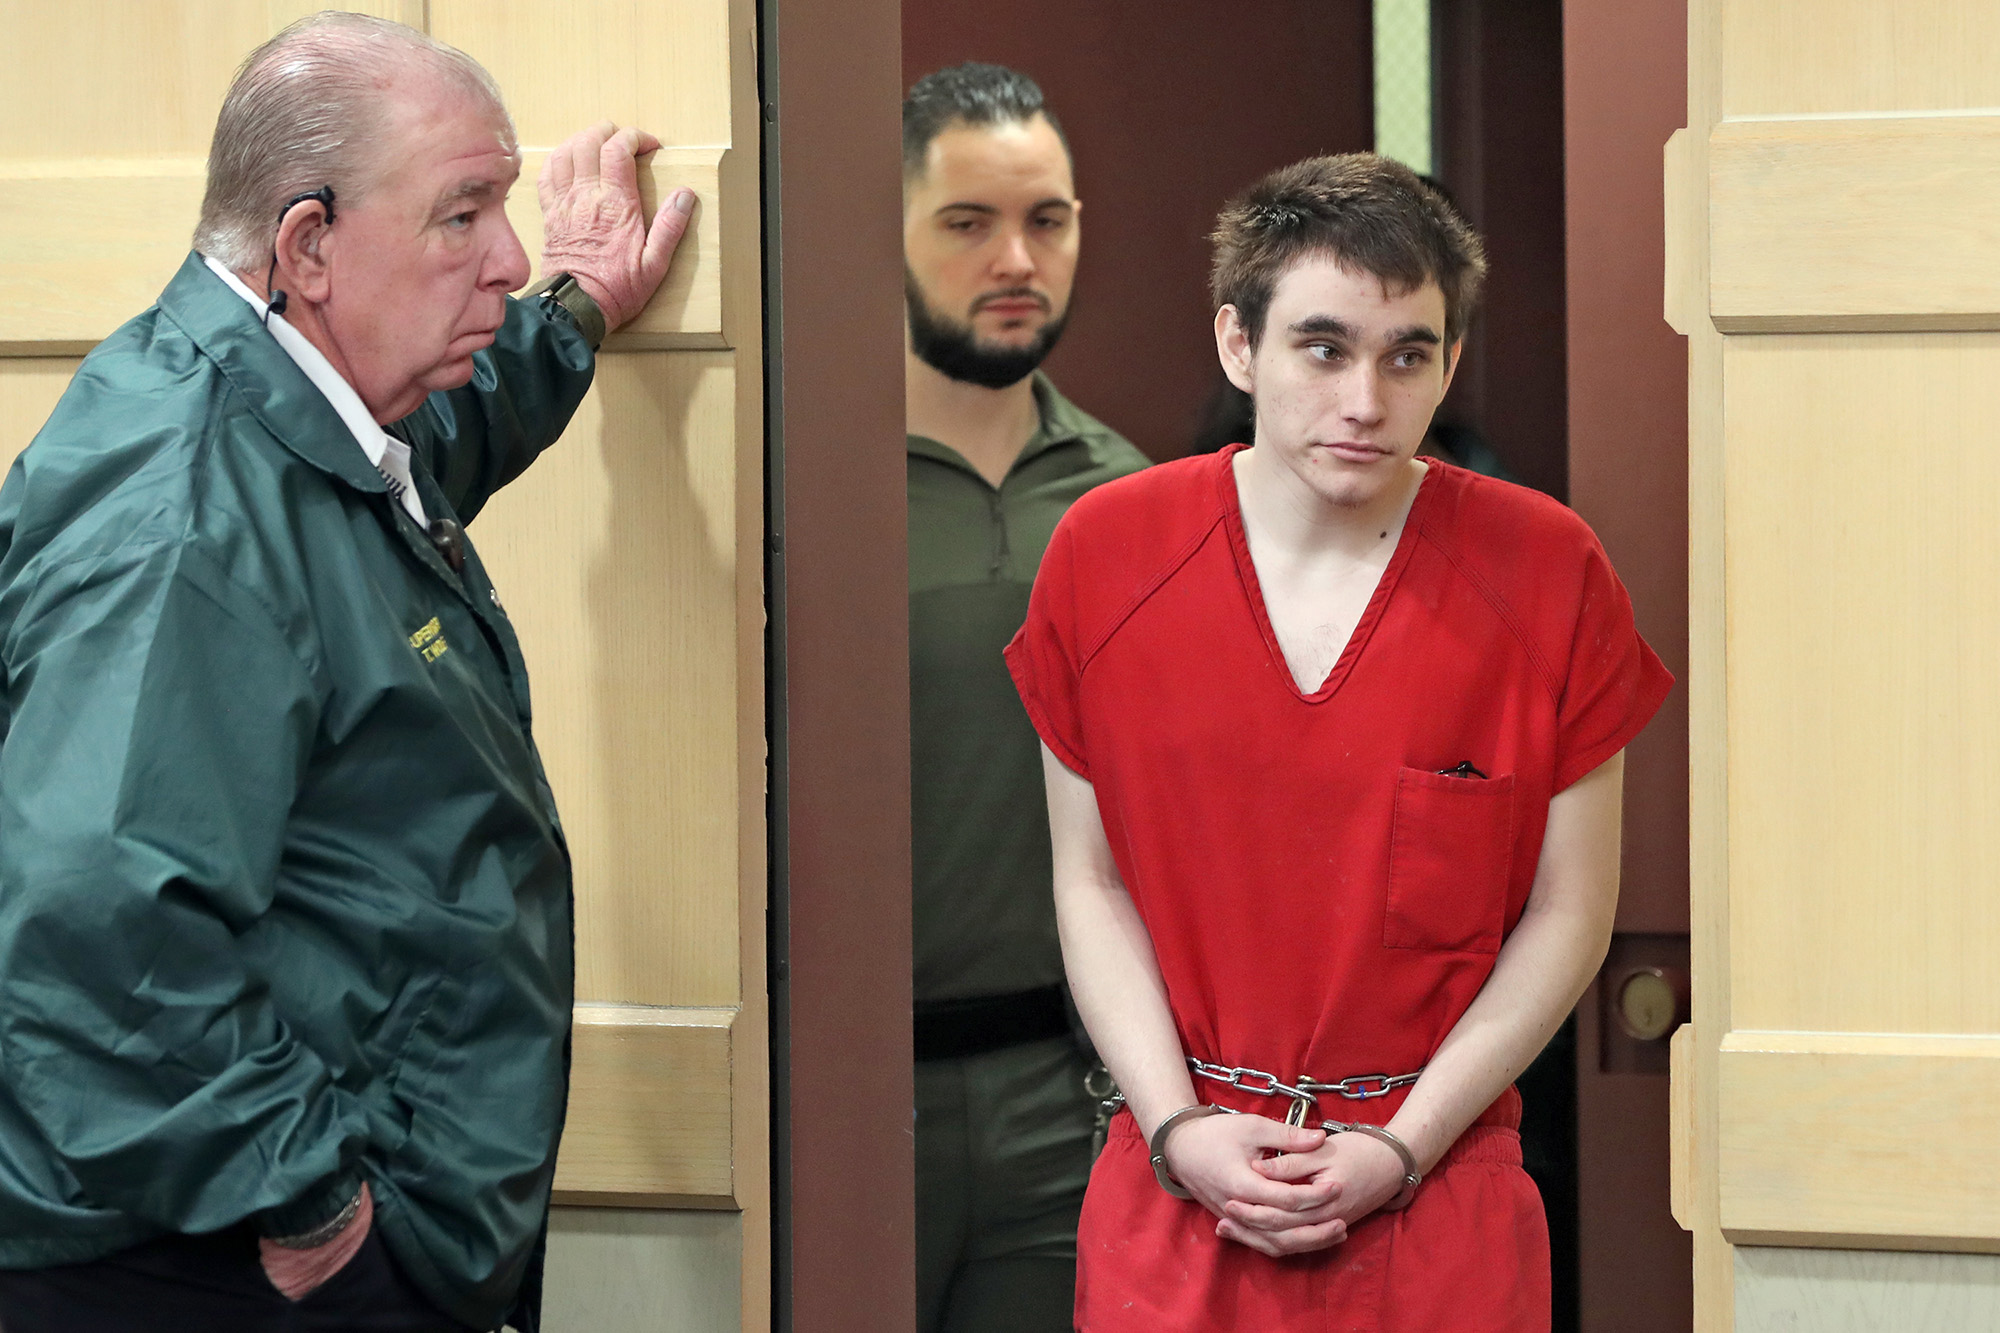 PHOTO: Parkland school shooter Nikolas Cruz enters the courtroom for a pre-trial hearing at the Broward County Courthouse in Fort Lauderdale on Jan. 27, 2020, for four criminal counts stemming from his alleged attack on a Broward jail guard in Nov. 2018.